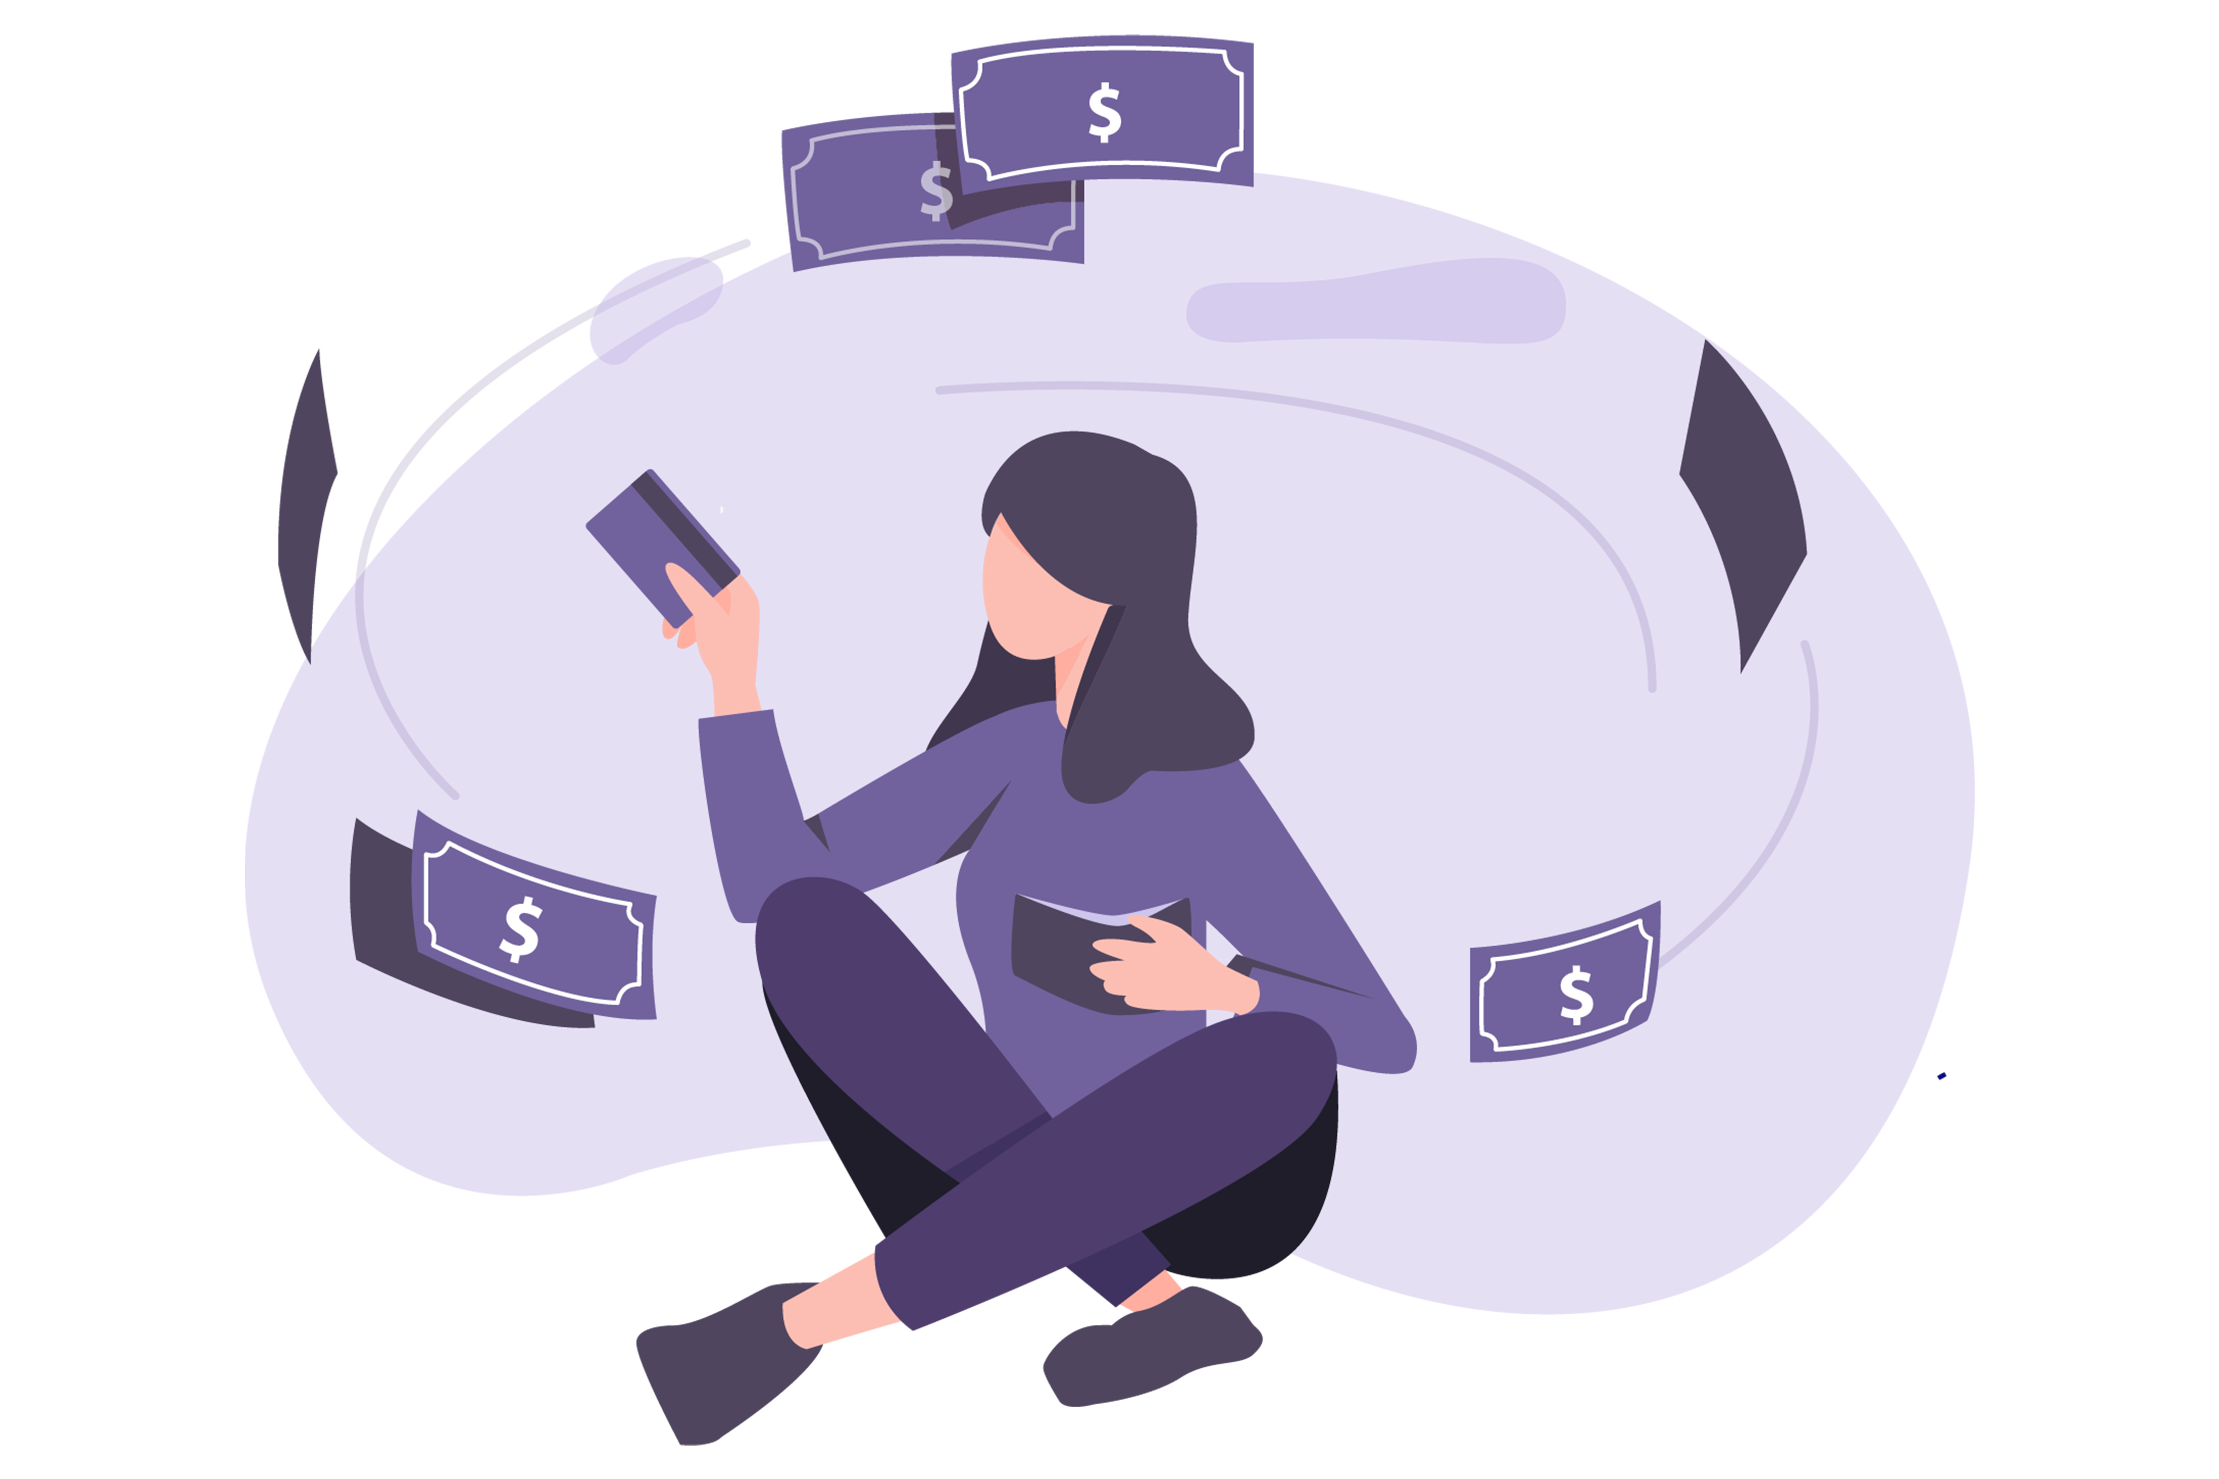 Illustration of woman holding credit card and wallet, enjoying cash flowing freely